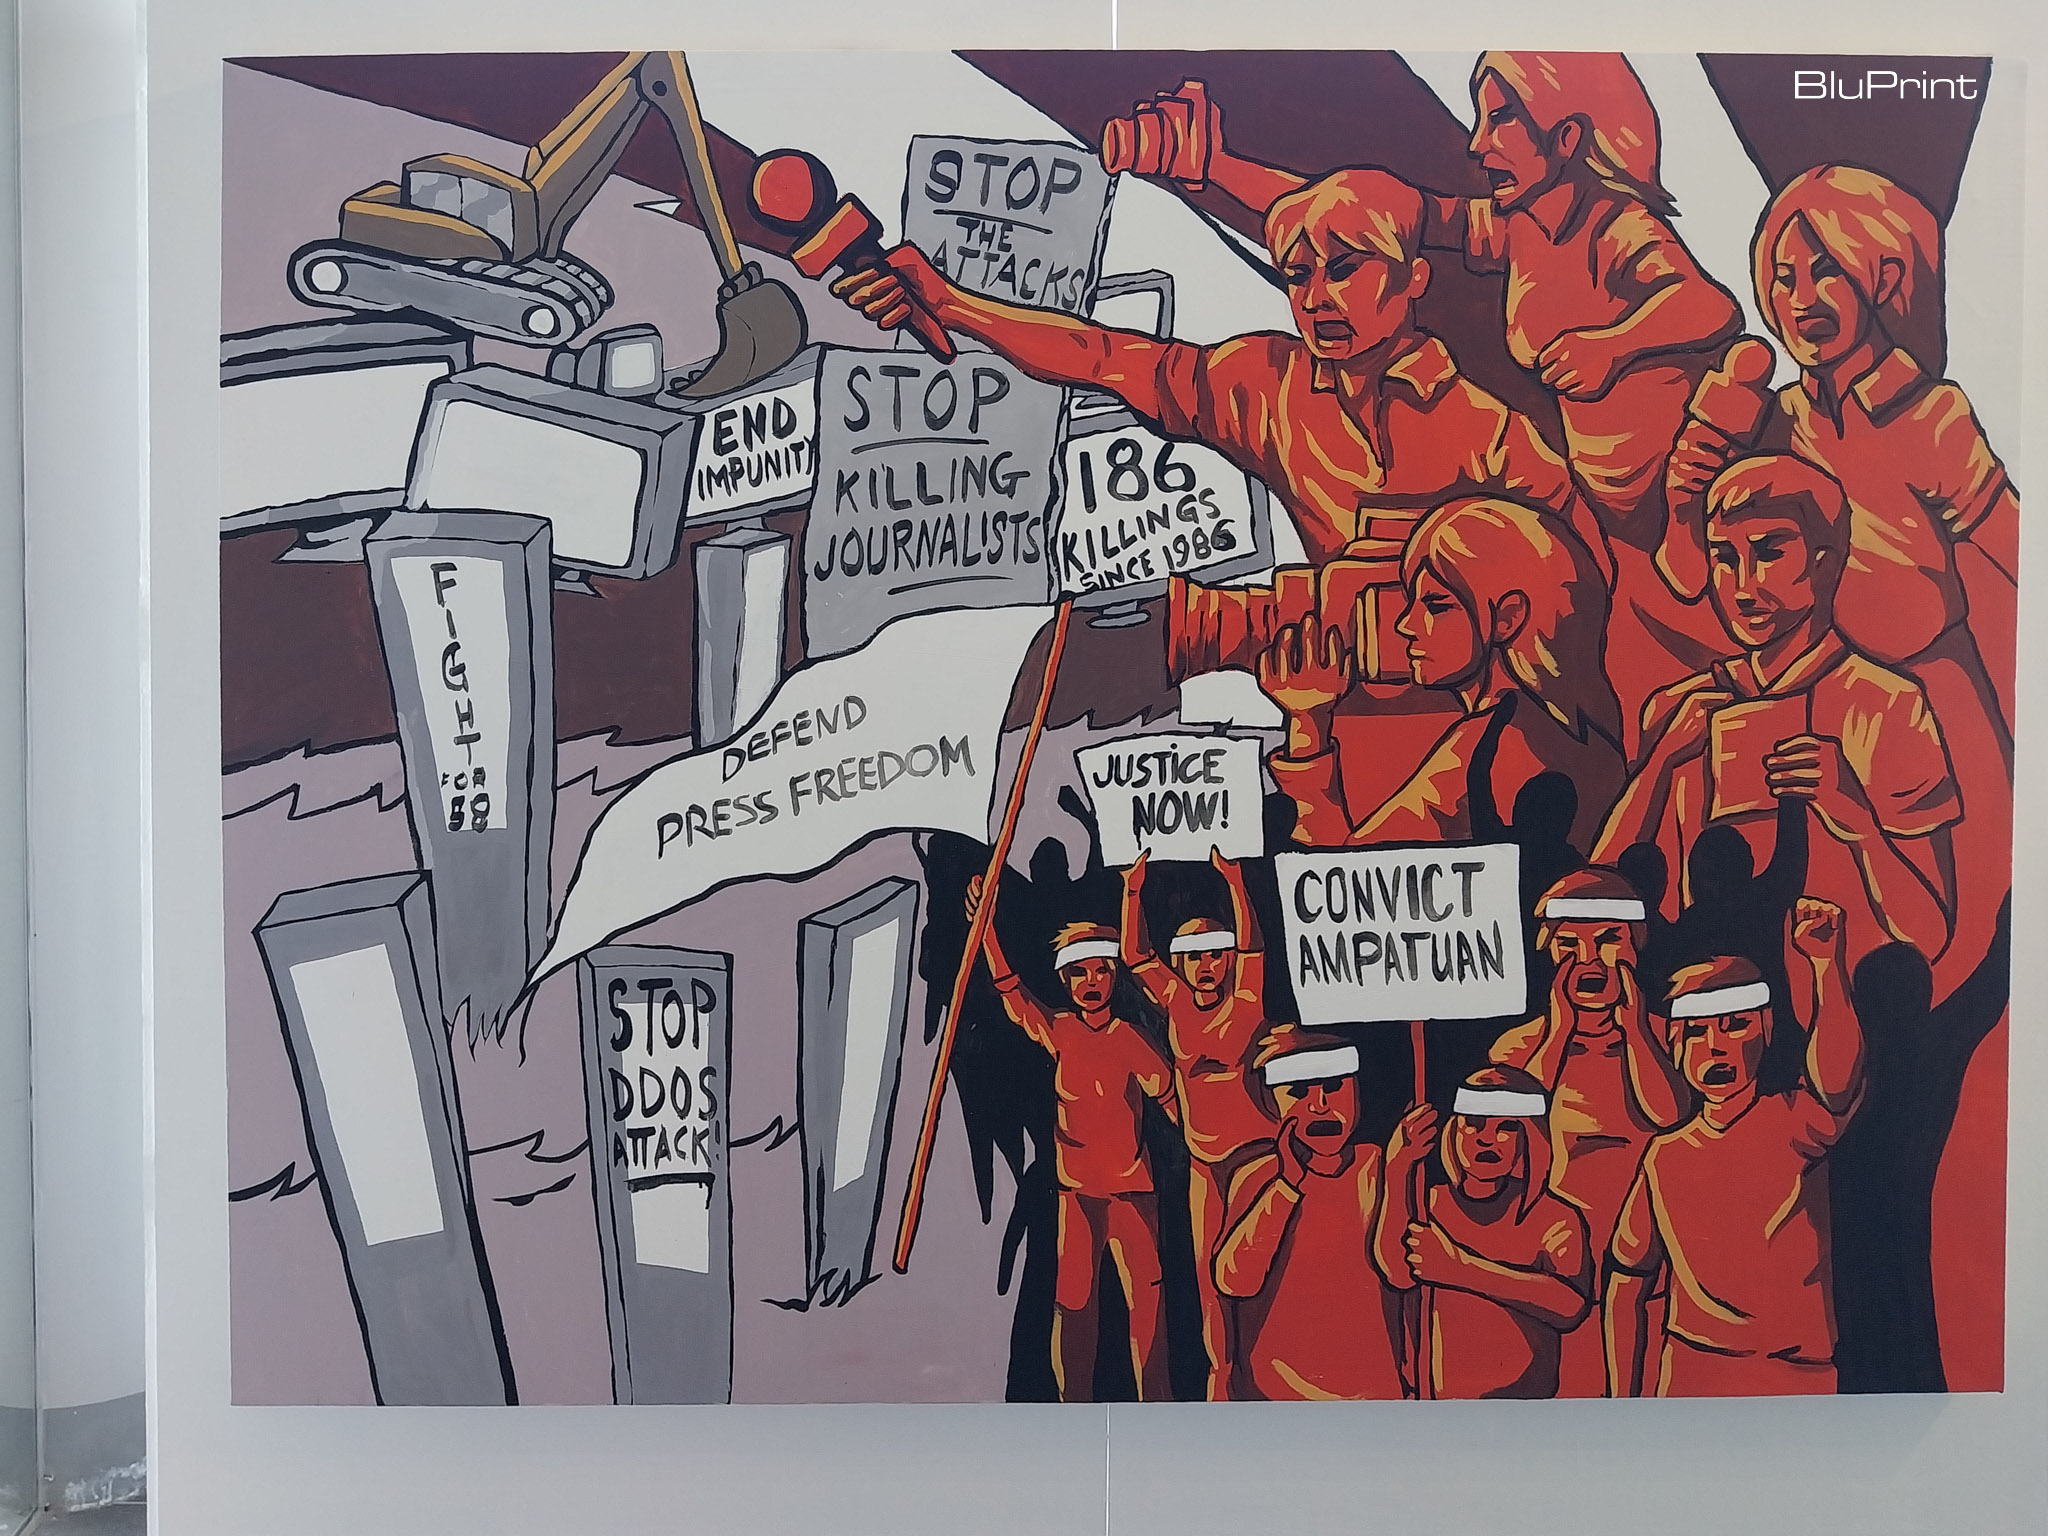 A replica of the "Fight for 58" mural shown at the "Warm Bodies" exhibit. Photo by Elle Yap.